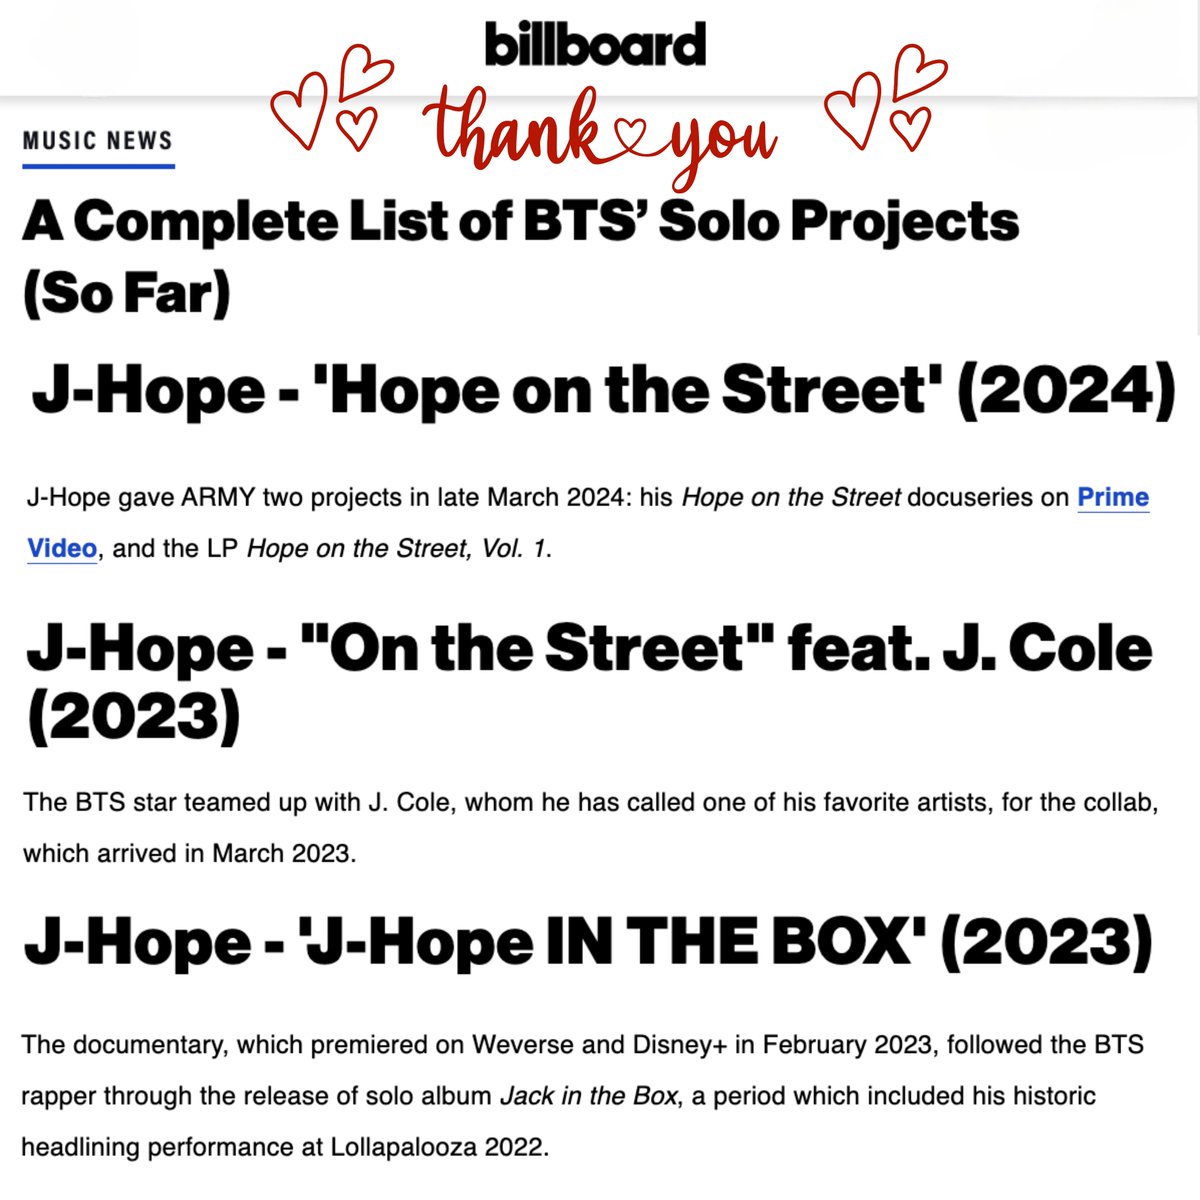 Thank you, @billboard, for hearing us out! 💐 Good job, Hobi's fans! 👏Let's share the feature: billboard.com/lists/bts-solo…